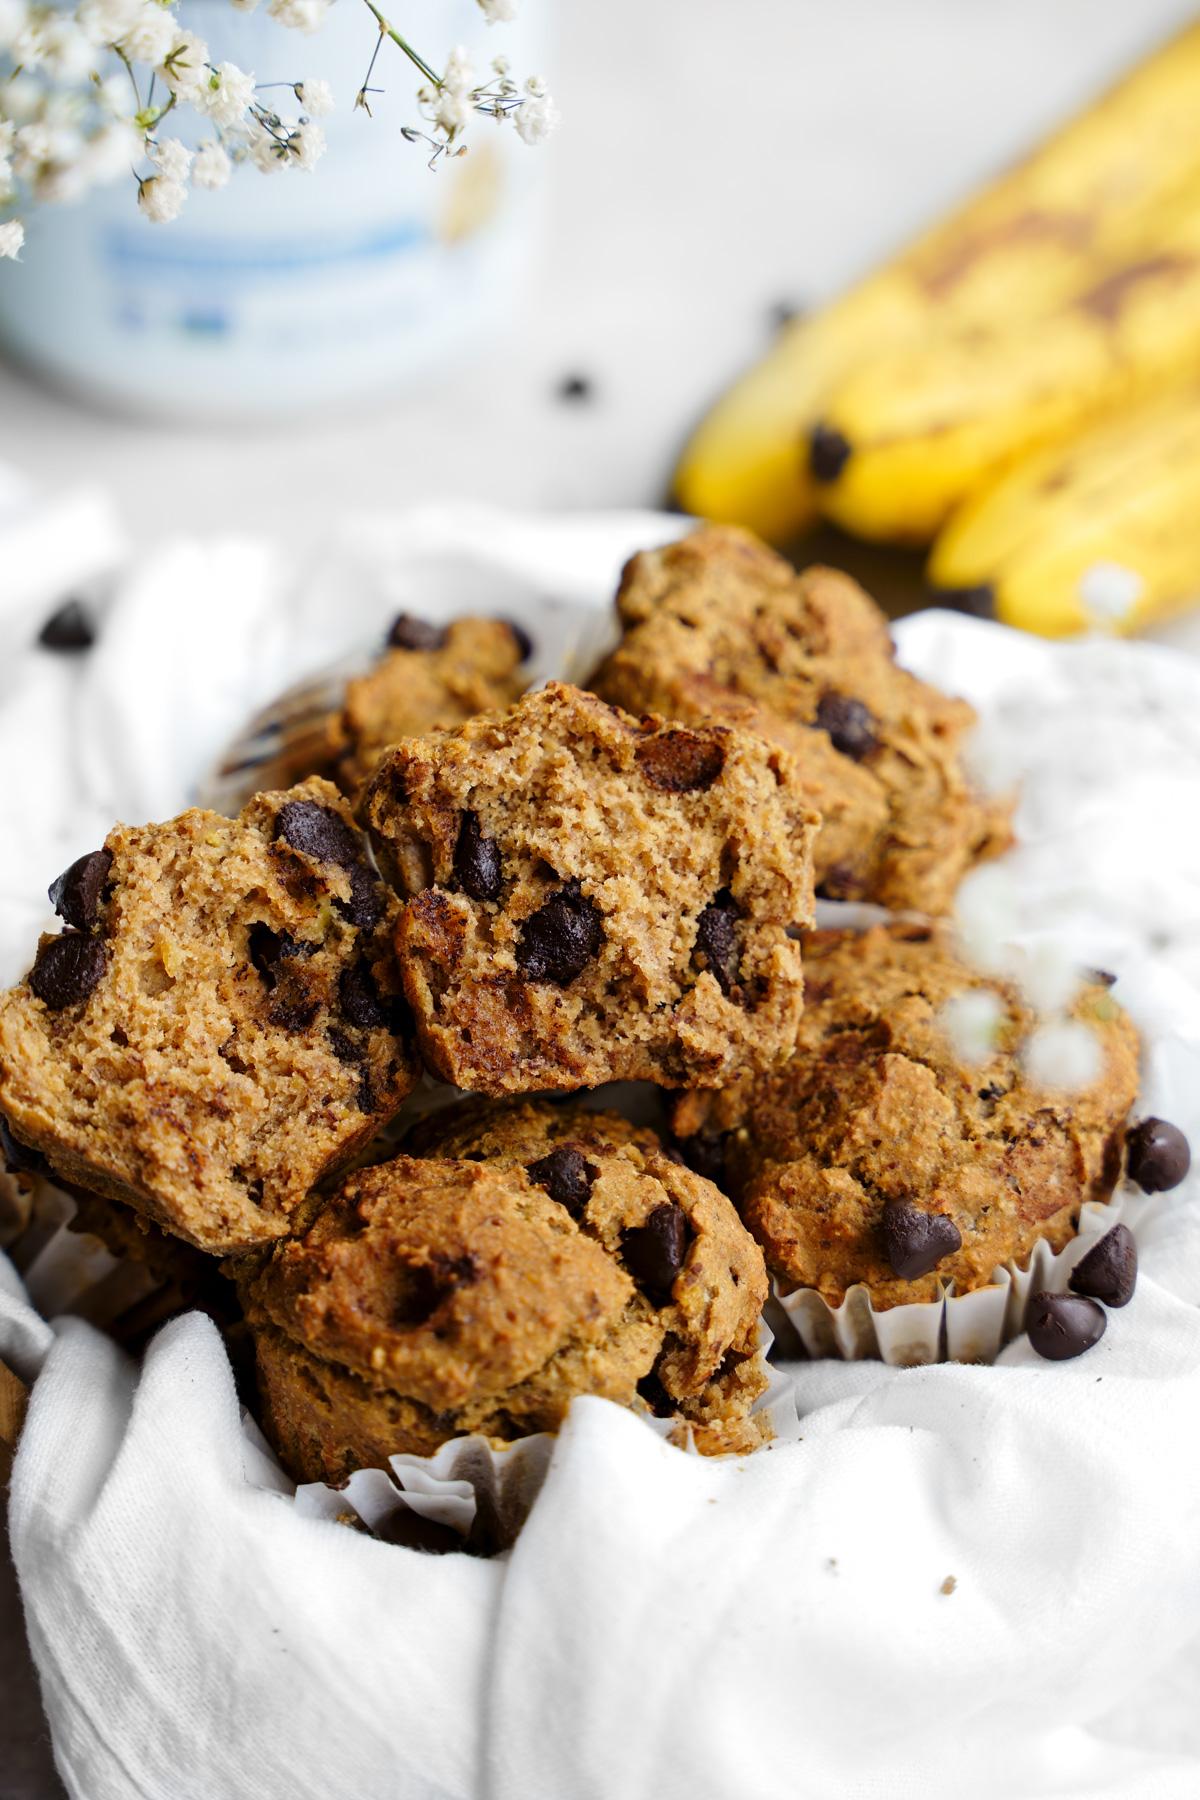 the vegan banana chocolate chip protein muffins broken in half to show the fluffy and moist texture